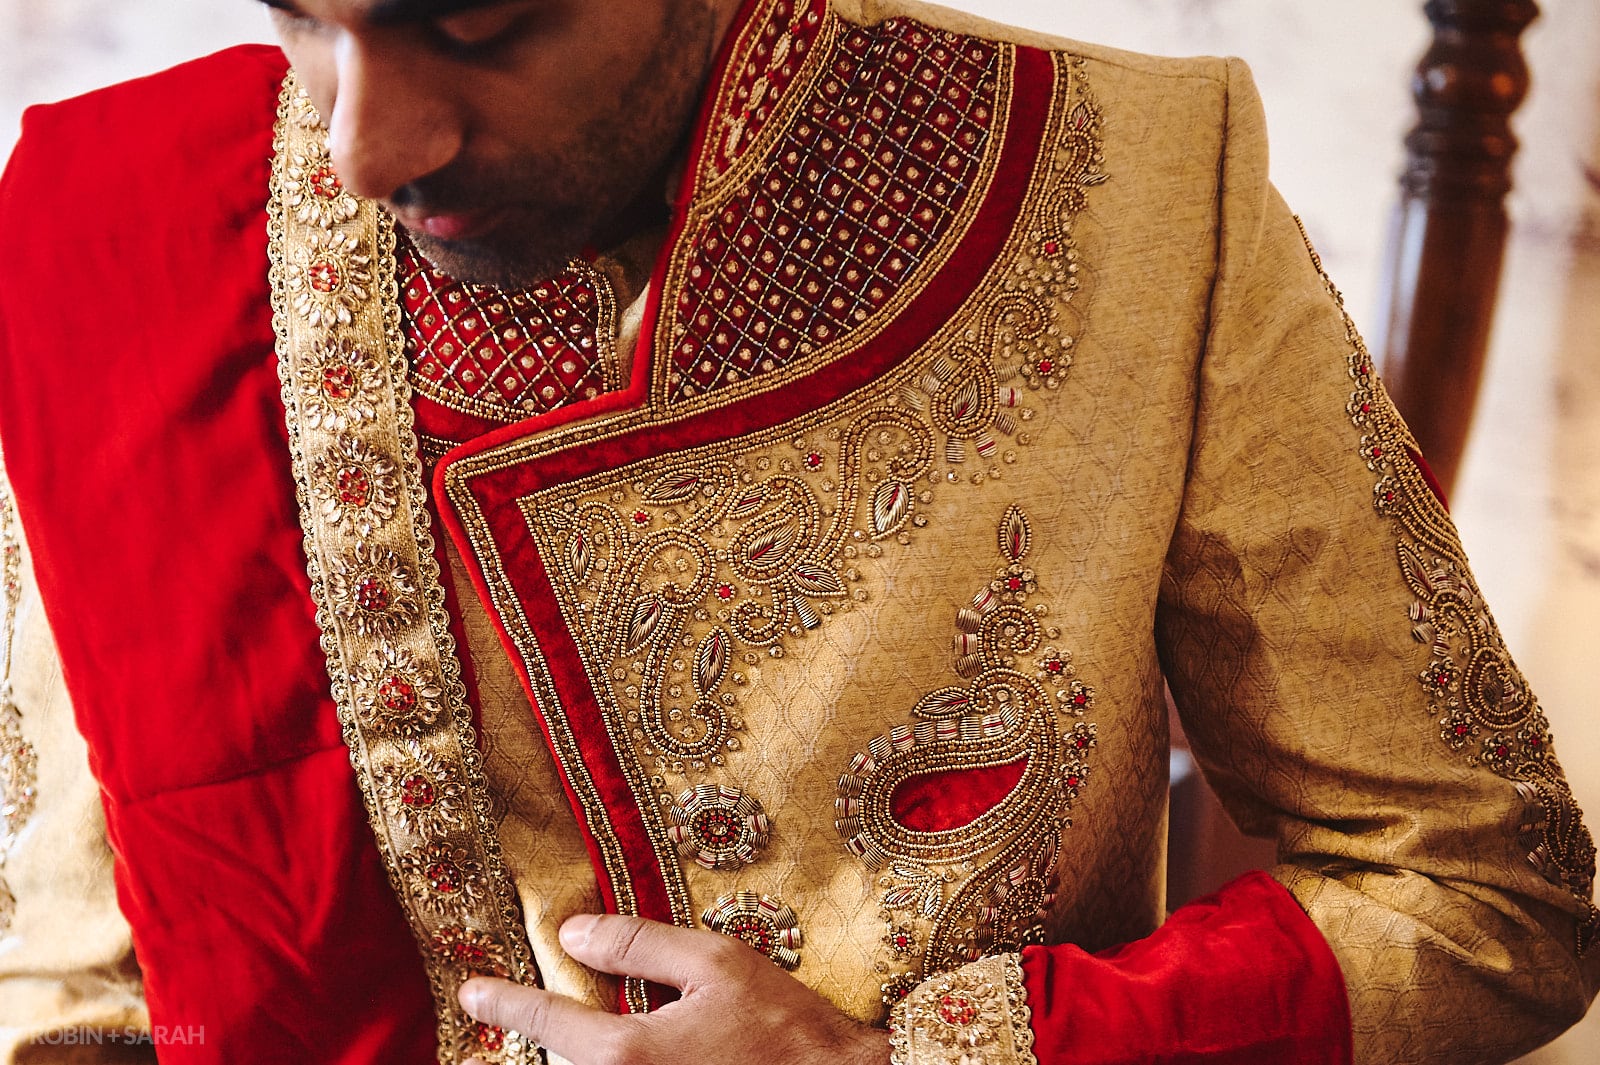 Groom and groomsmen in Indian wedding outfits prepare for wedding